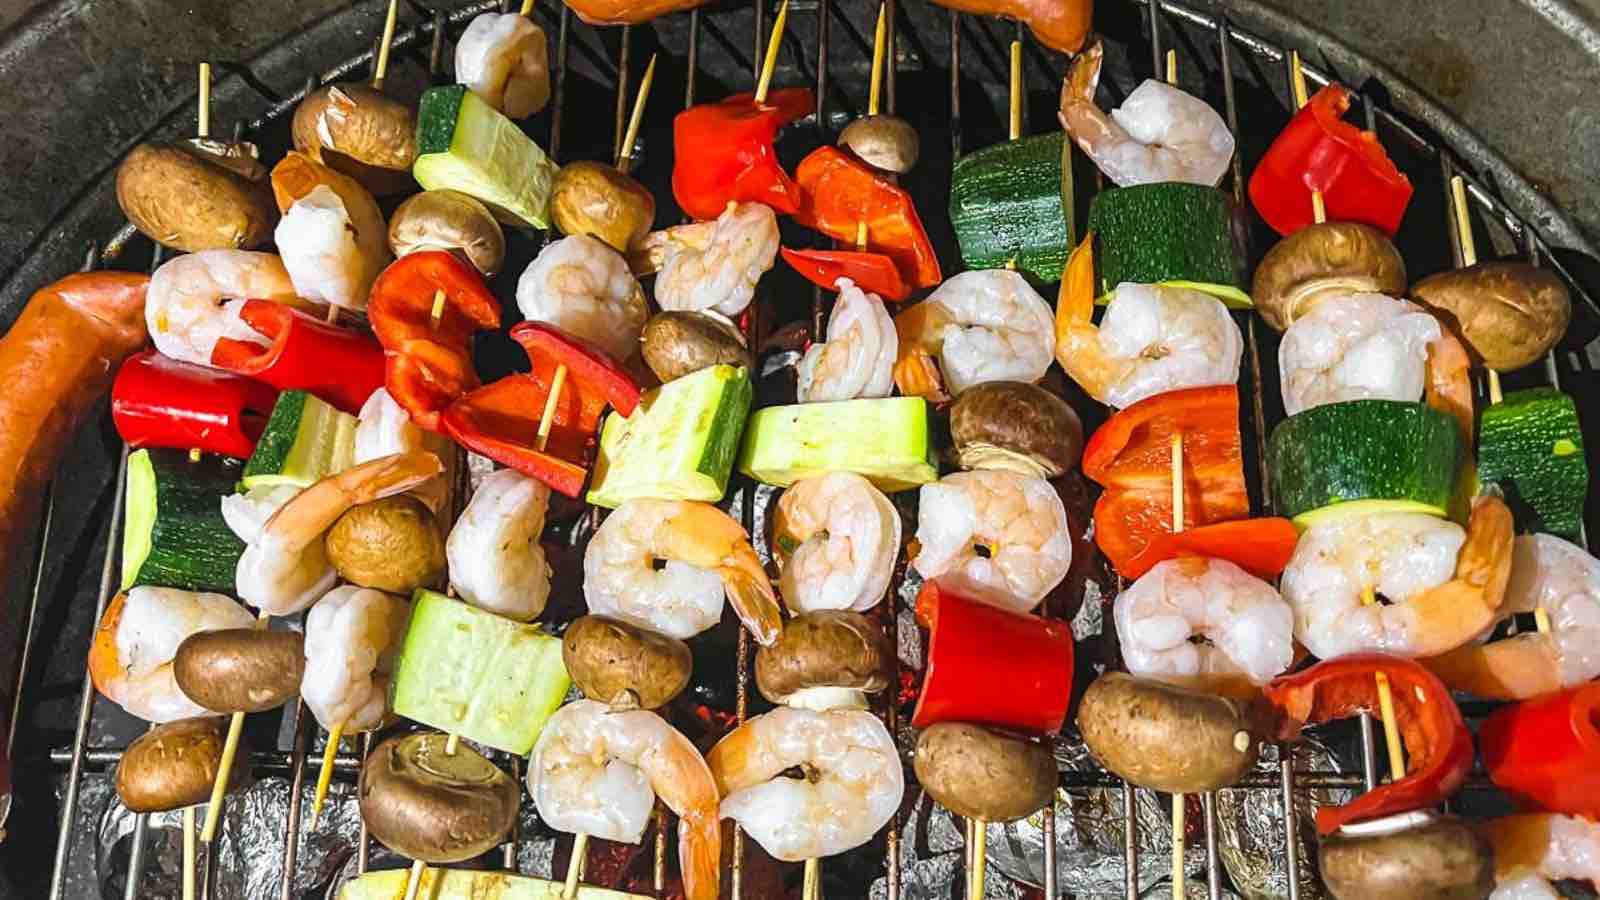 Skewers of vegetables and shrimp on a grill.